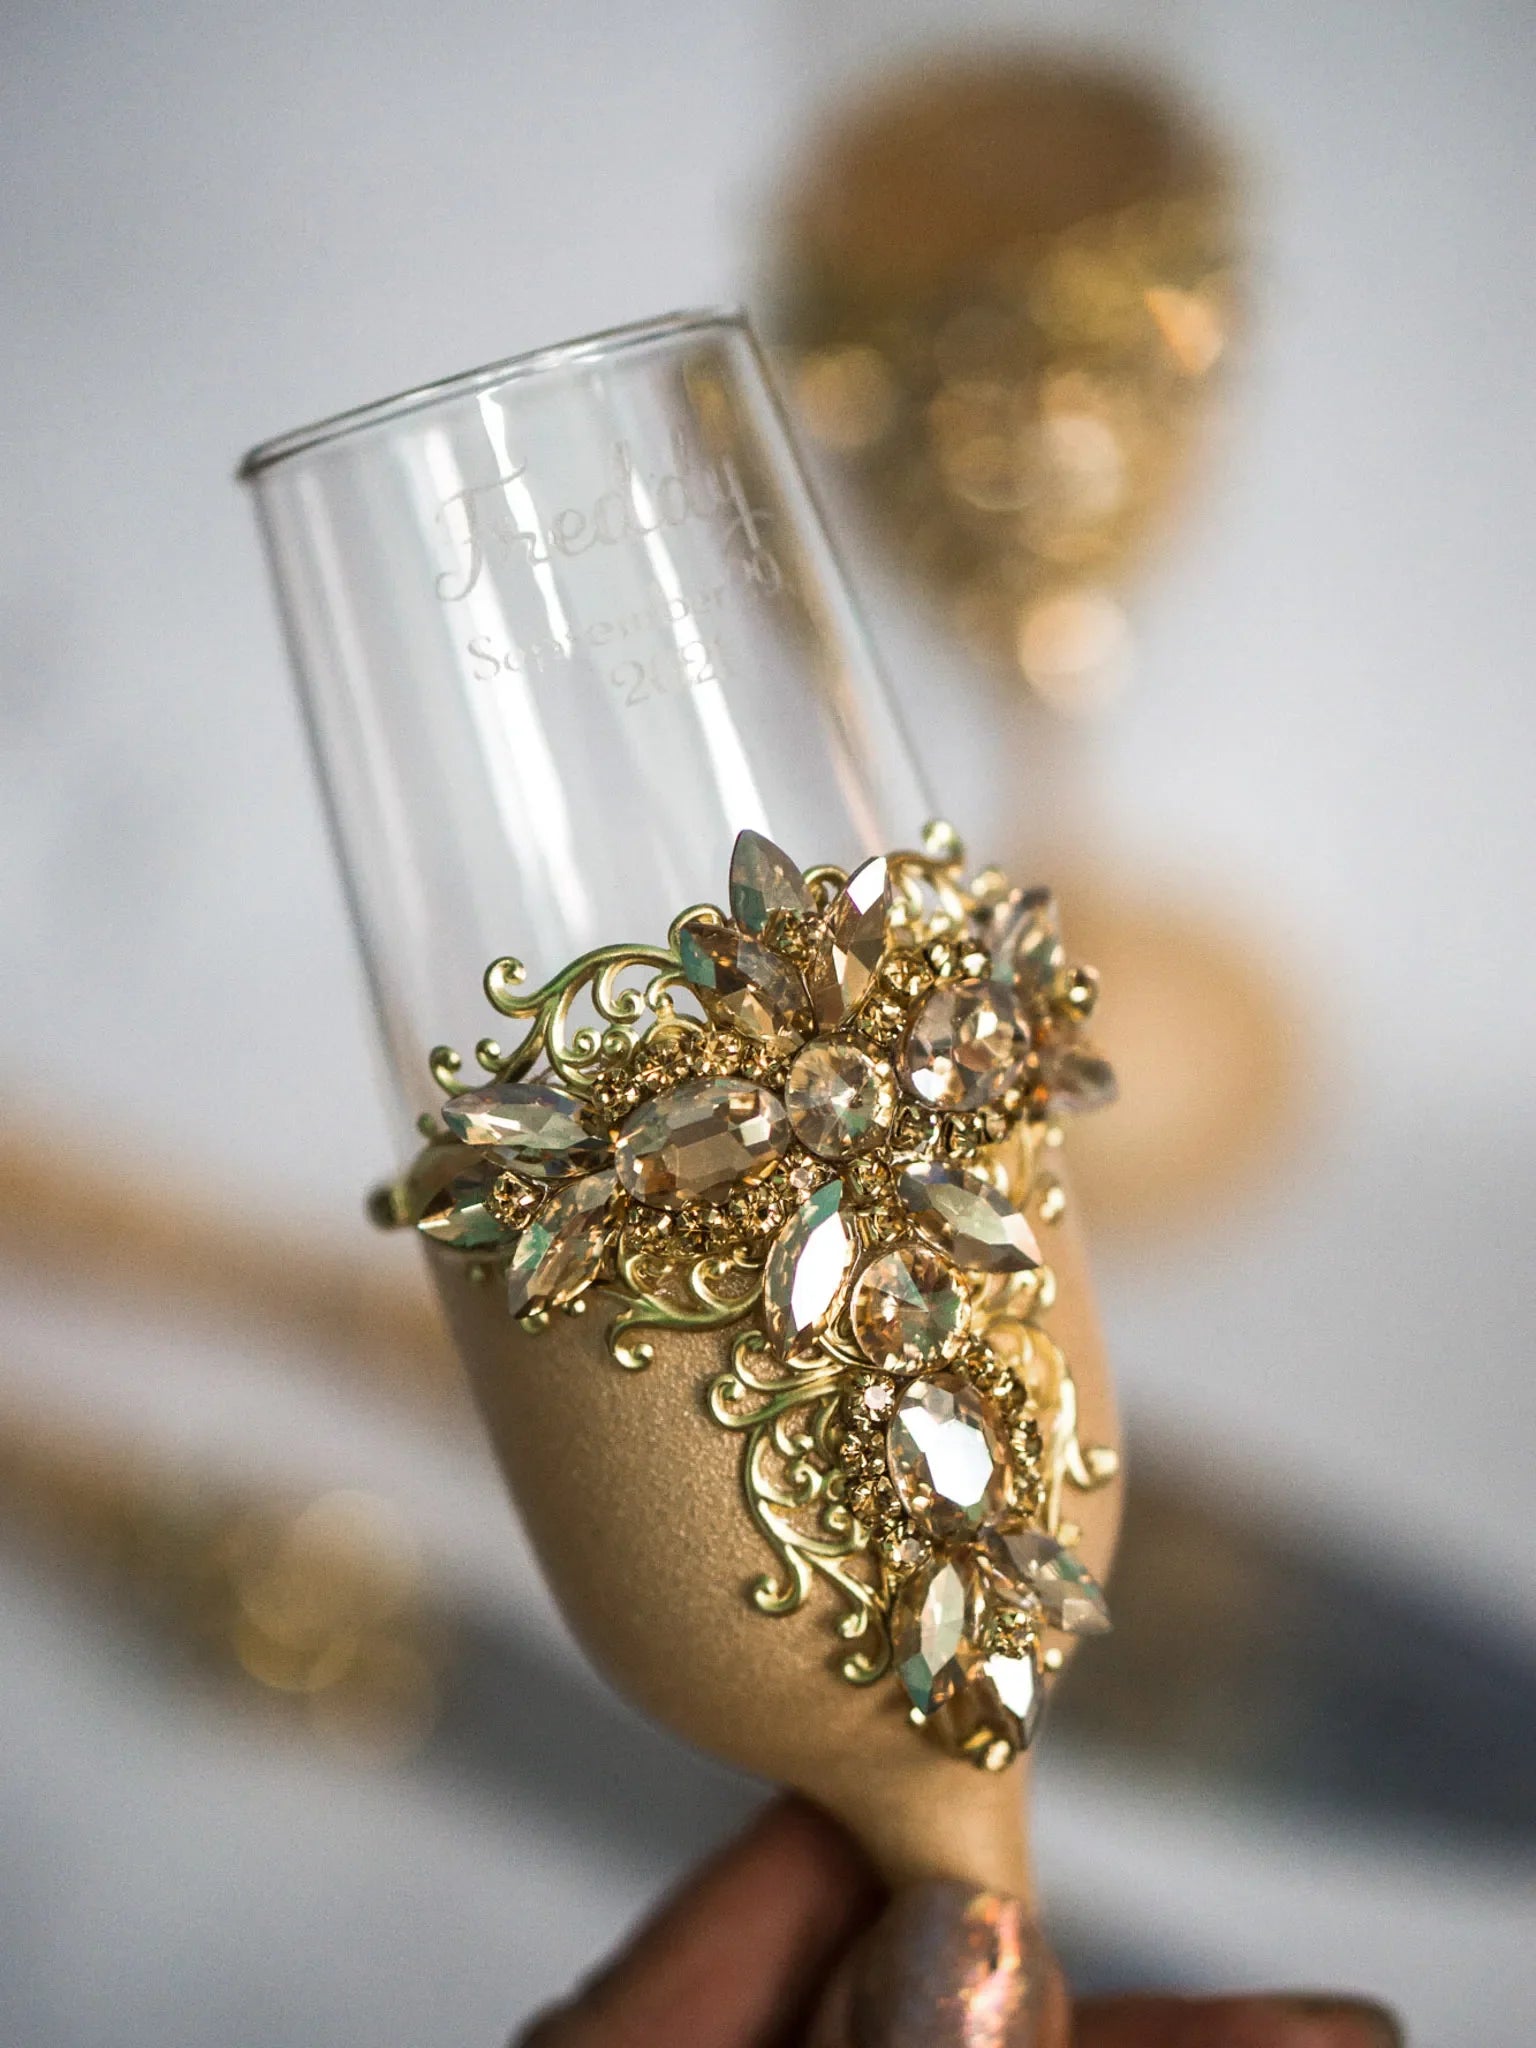 Special occasion stemware in gold